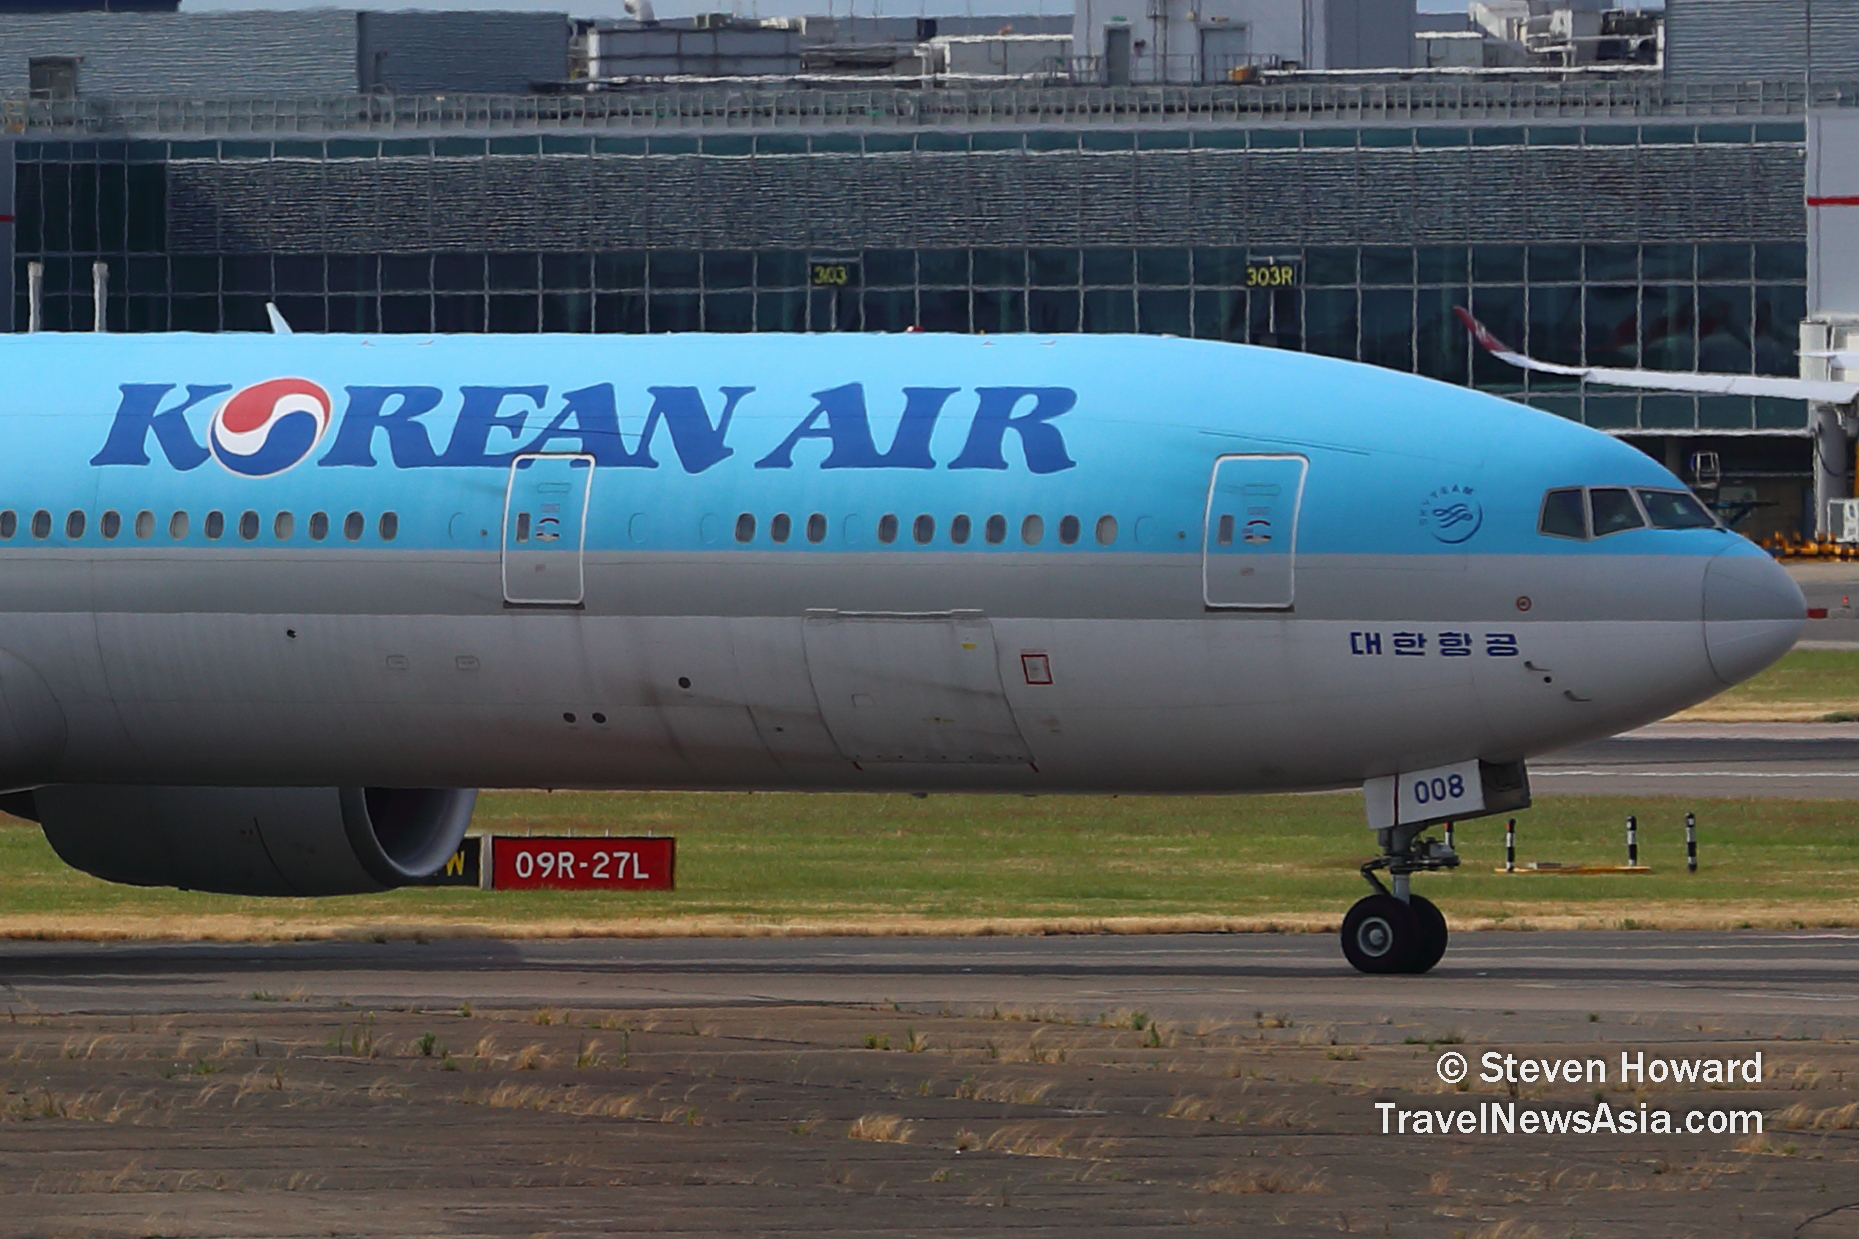 Korean Air B777 reg: HL8008 at LHR in June 2023. Picture by Steven Howard of TravelNewsAsia.com Click to enlarge.